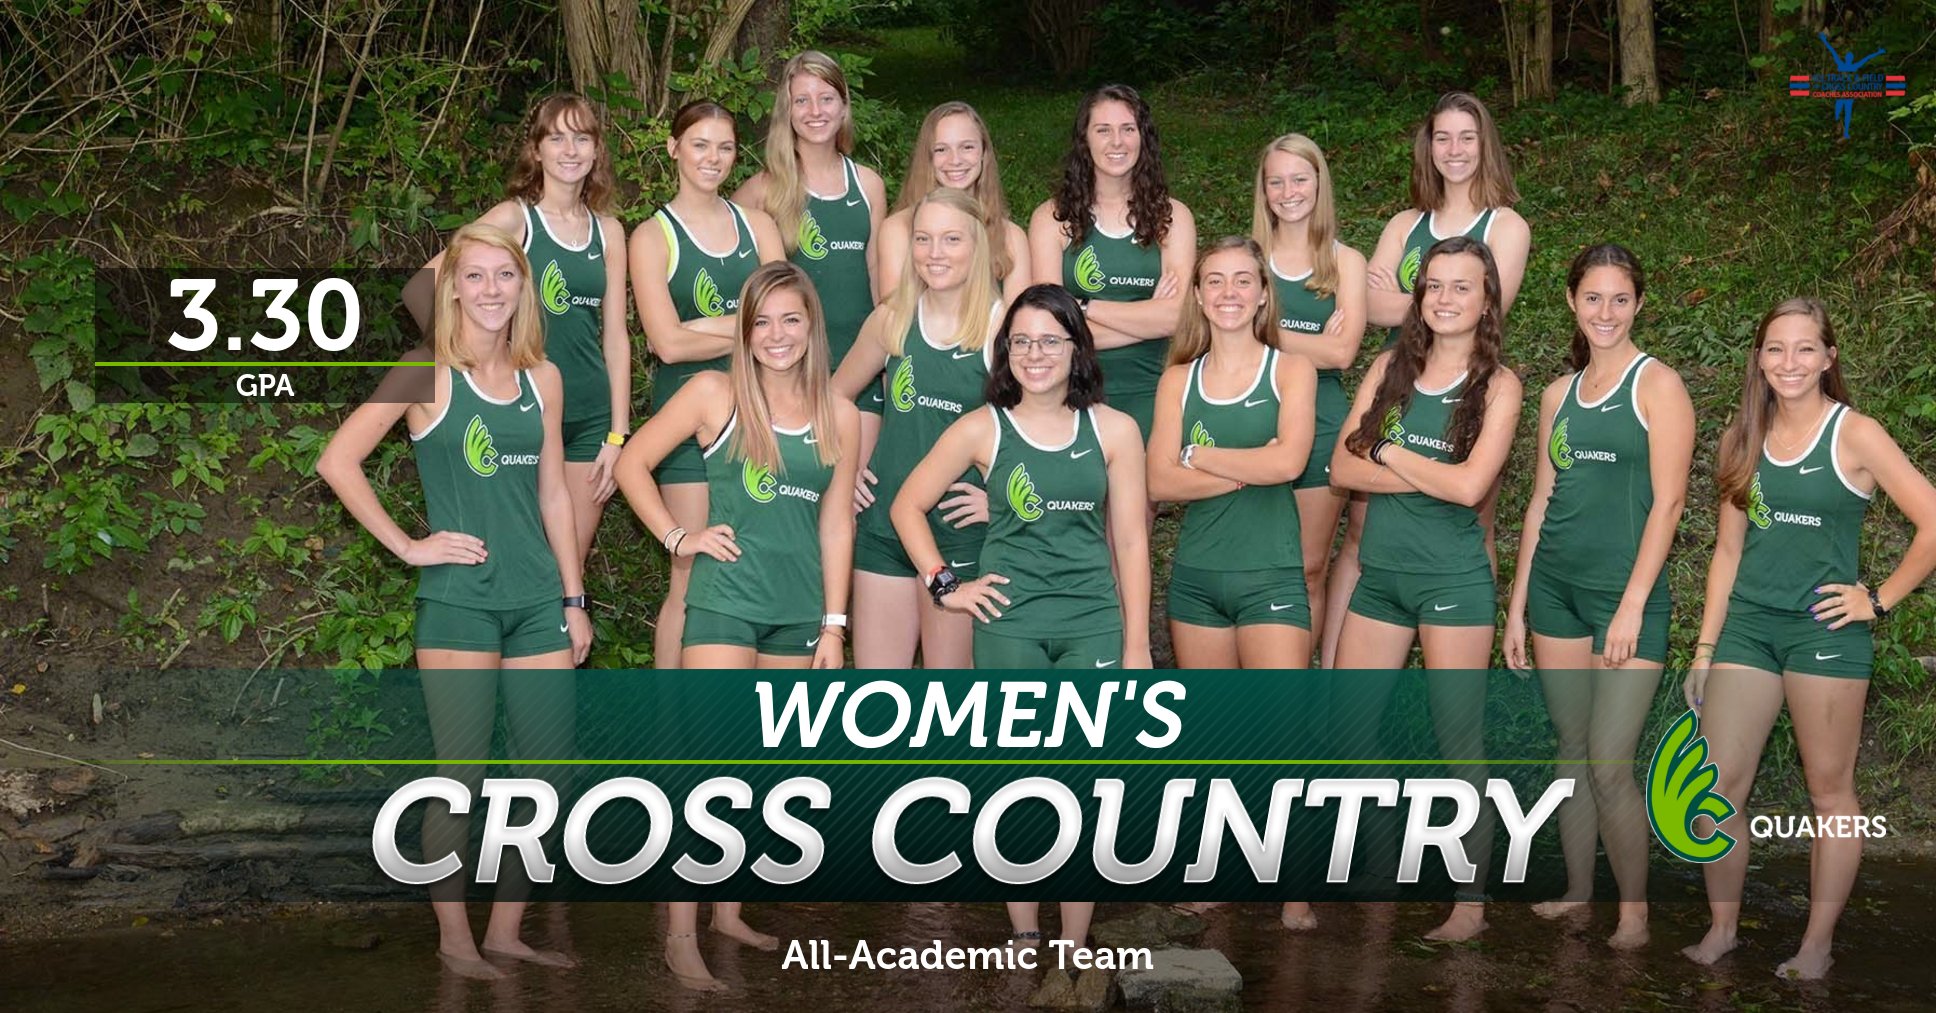 Women's Cross Country Named All-Academic Team by USTFCCCA